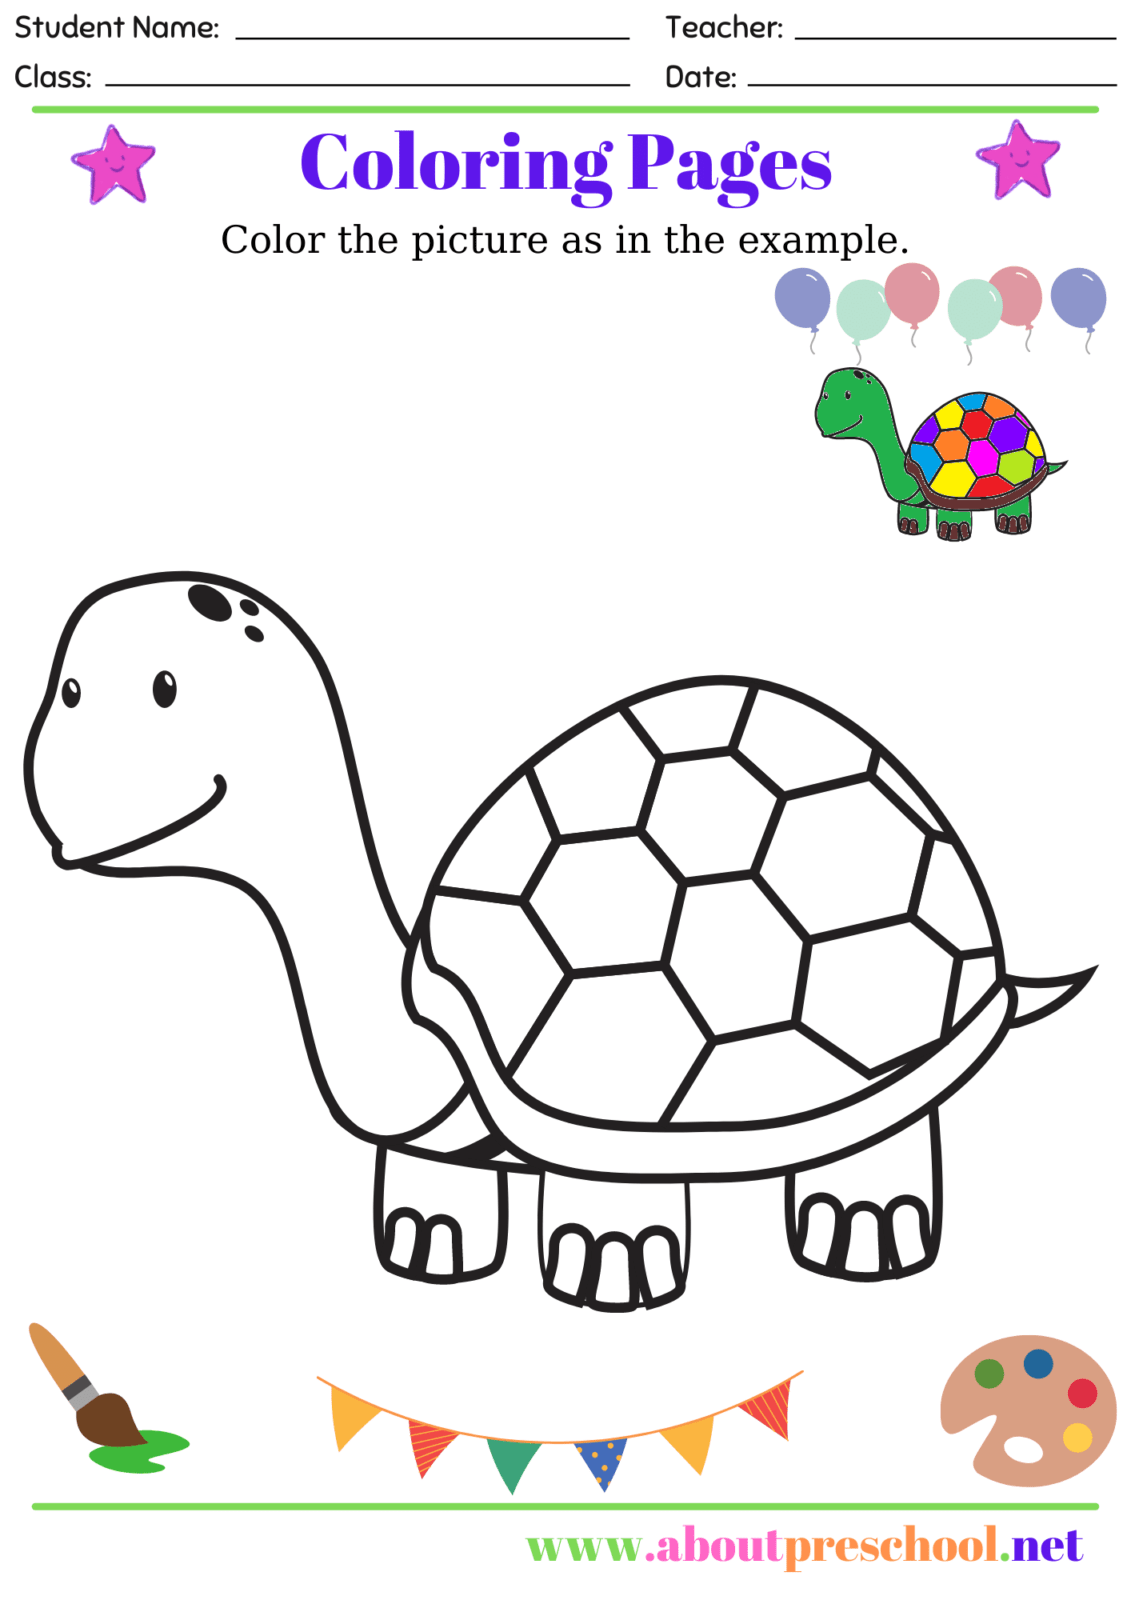 Coloring Pages 20   About Preschool